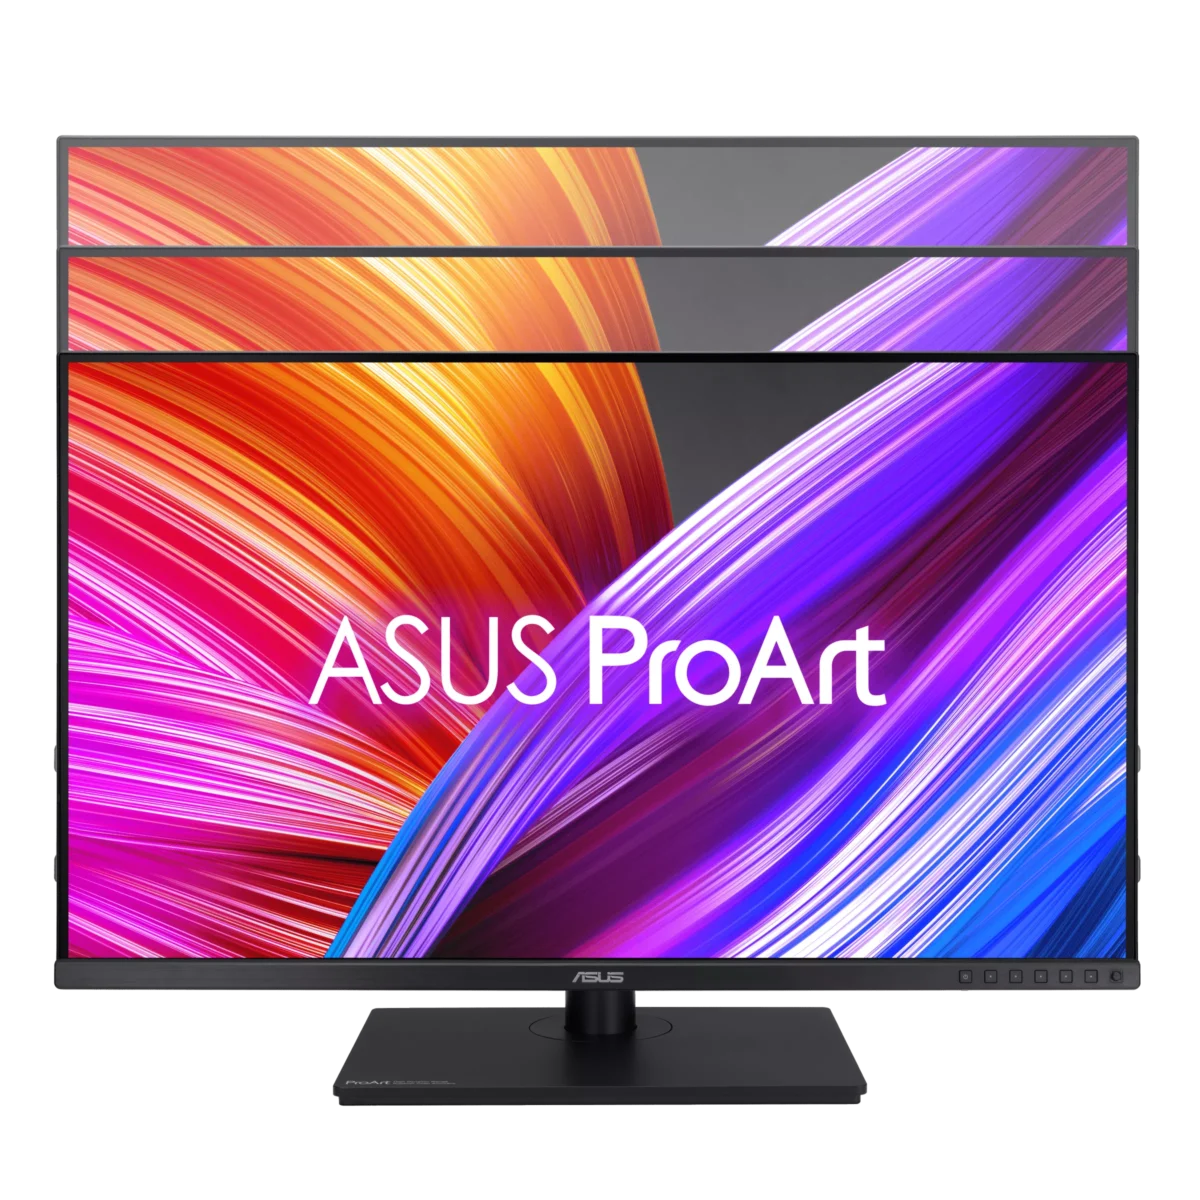 The asus proart tv is shown on a black background.